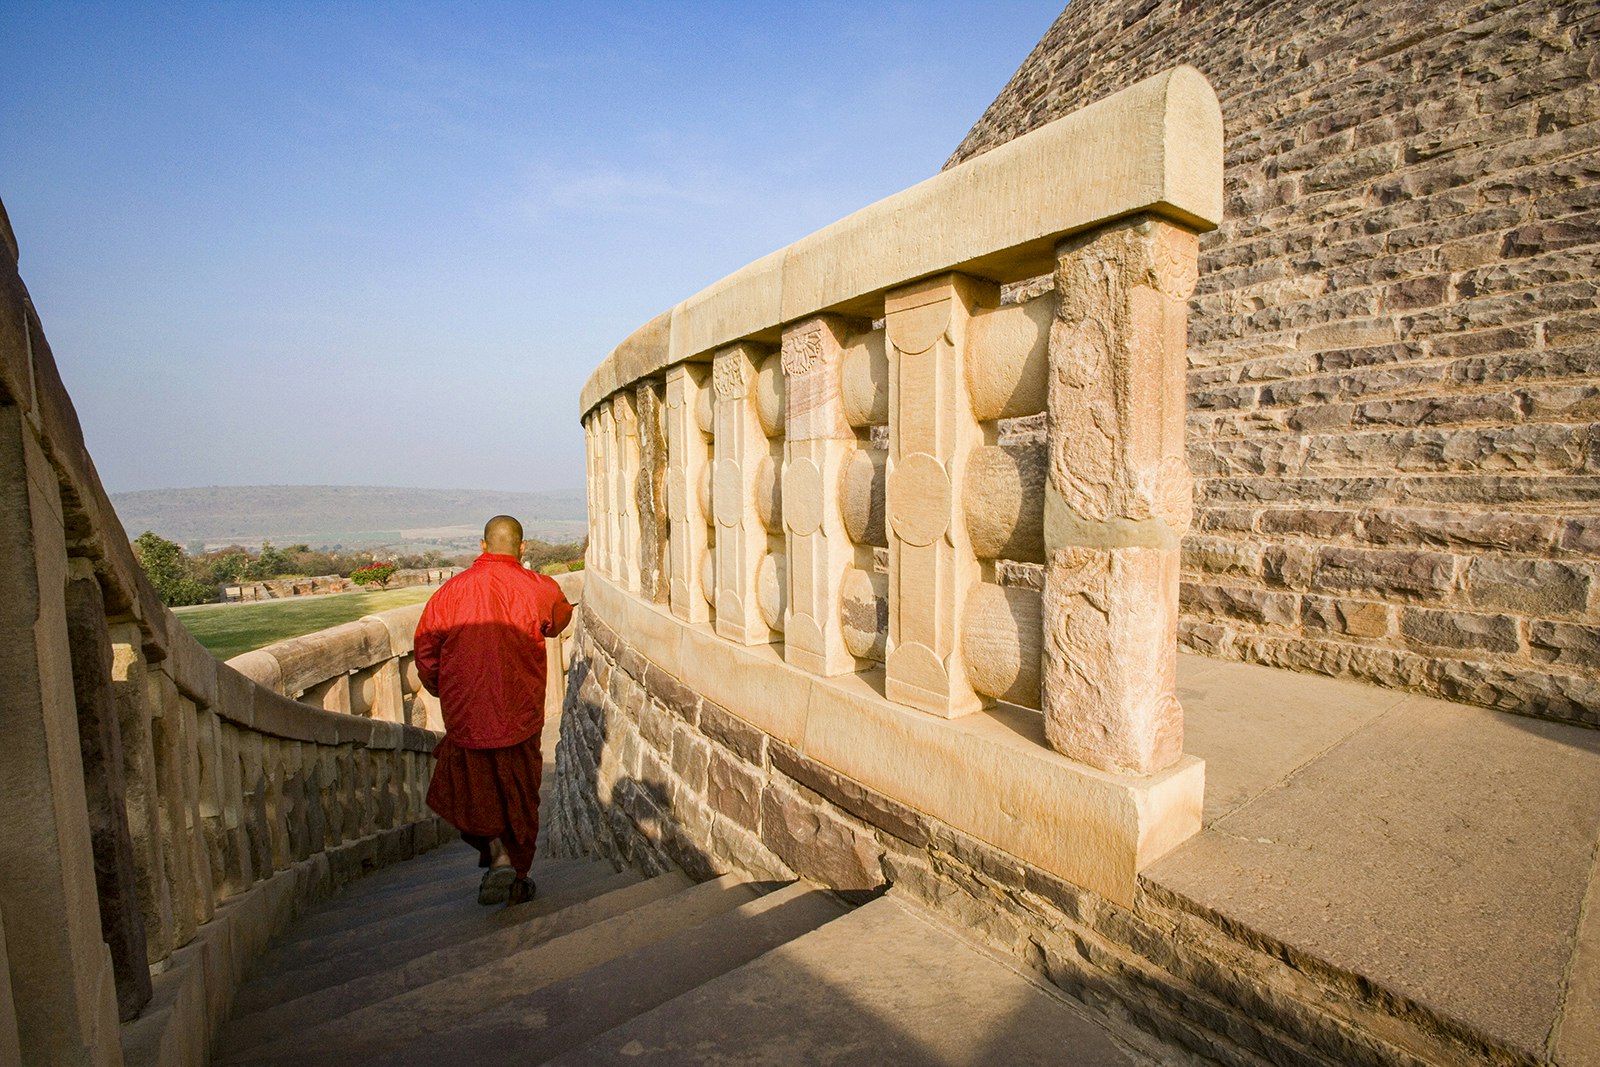 A monk clad in orange walks down a curved staircase encircling the rounded walls of the Great Stupa in Madhya Pradesh, India.